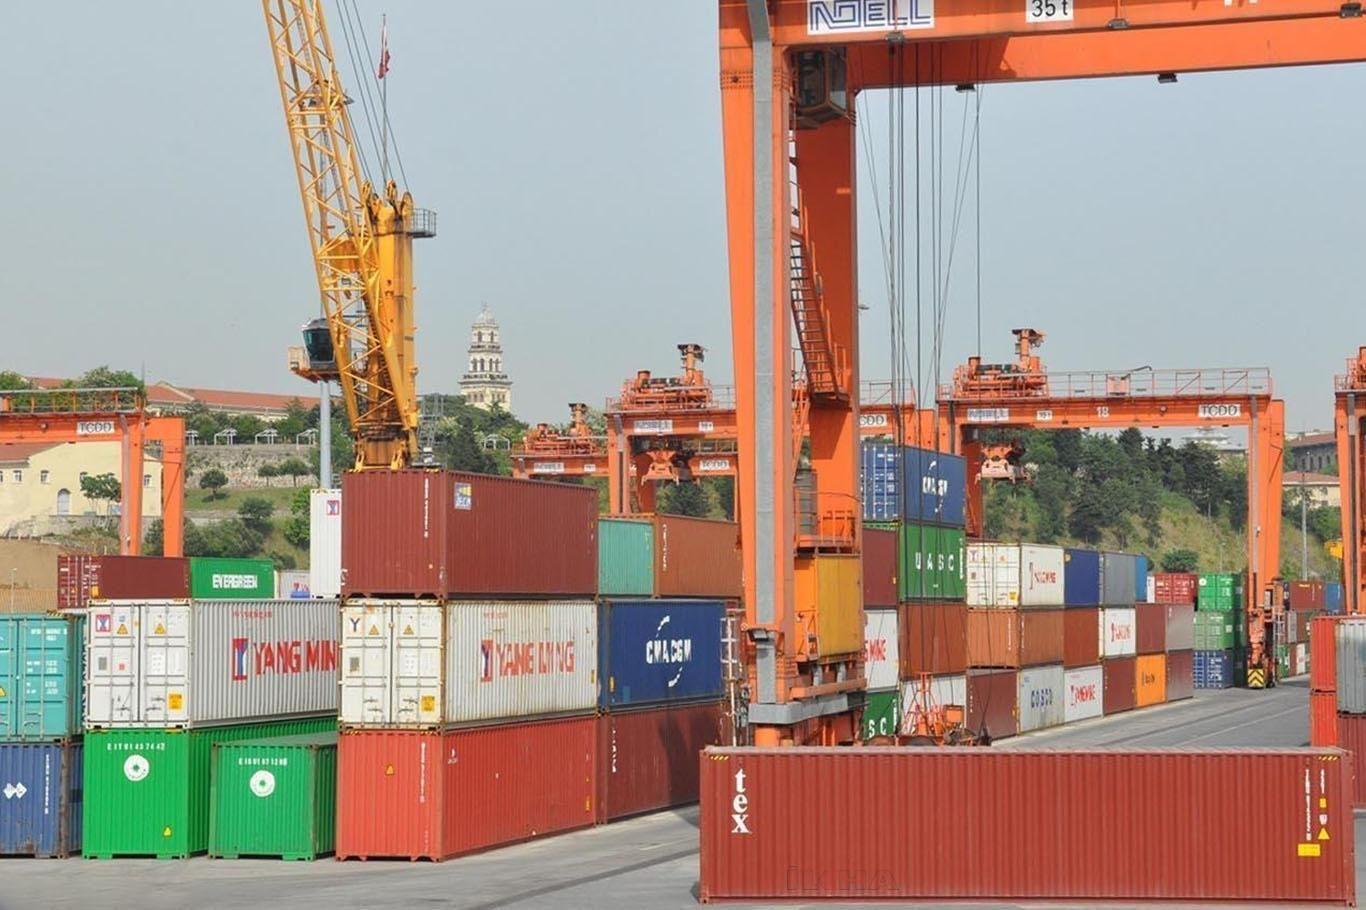 Turkey’s overall export unit value index drops by 3.5% in May 2020